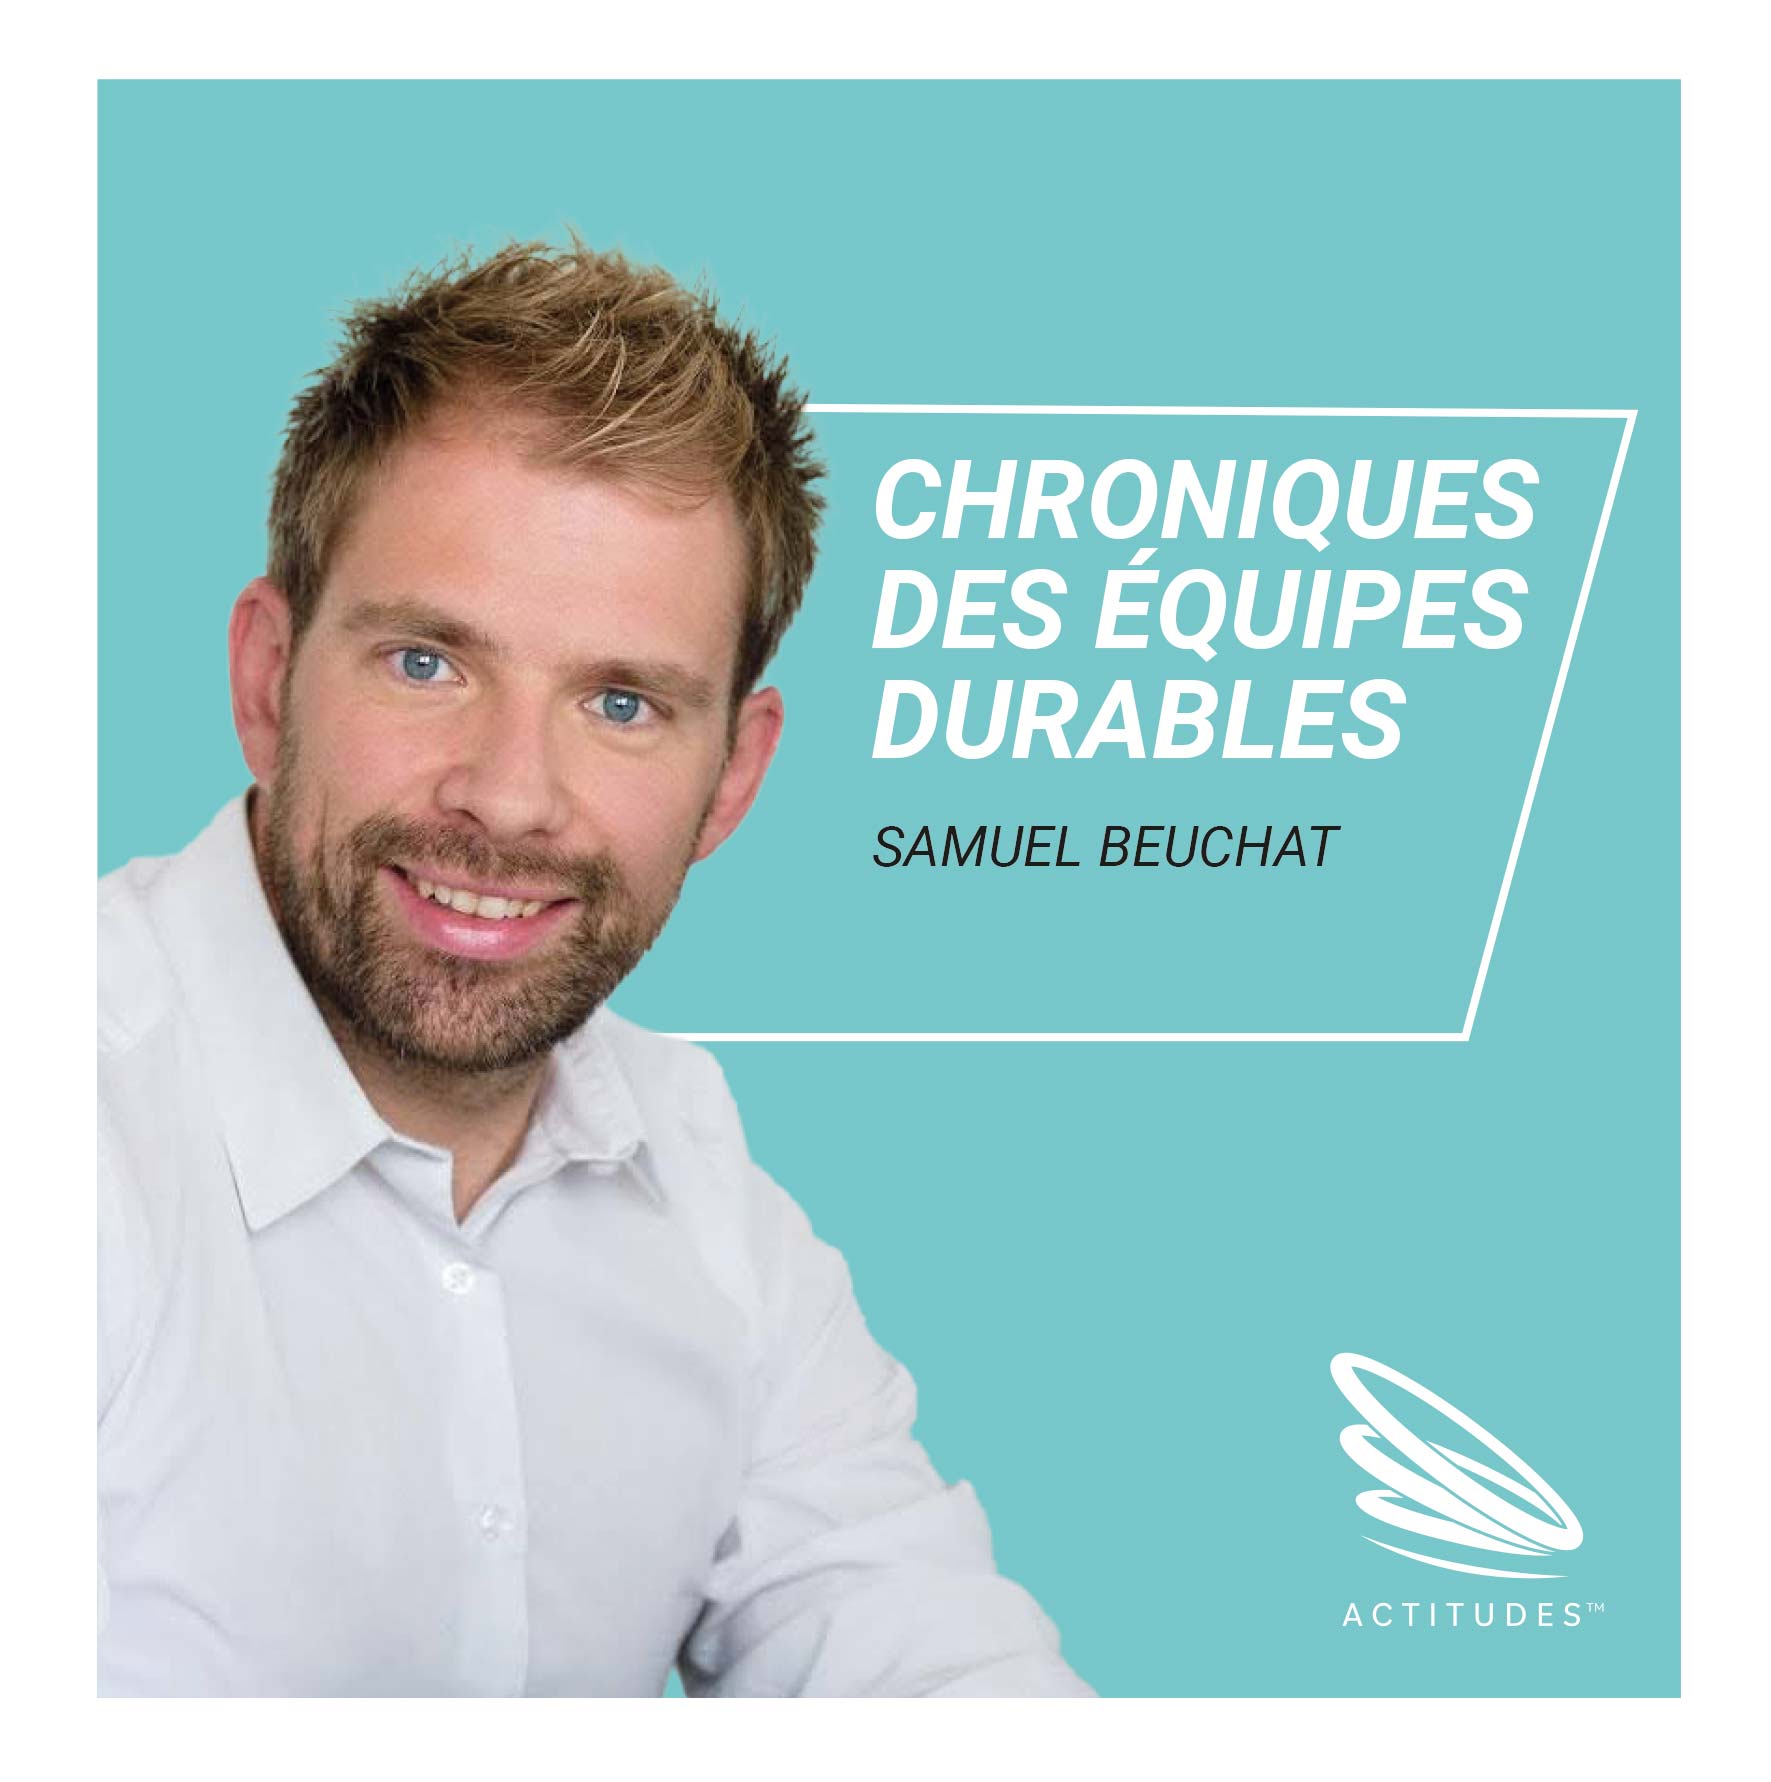 Putting people at the heart of engineering: "Chronique des équipes durables" with Samuel Beuchat